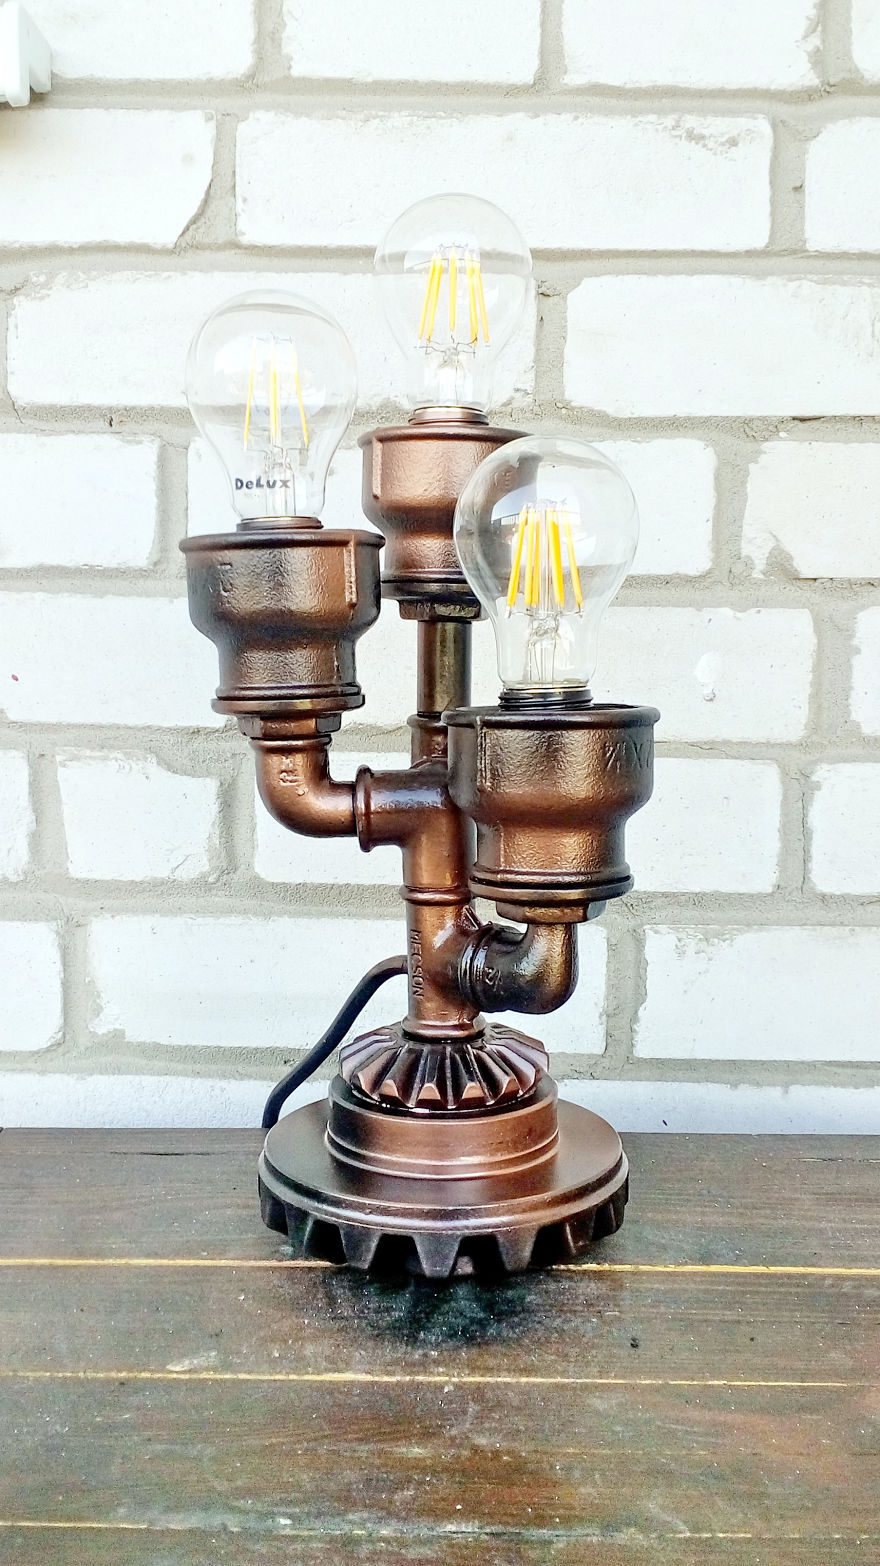 Rustic Lamp Pipe Lamps Rustic Lamp Bulb Steampunk Bedside Lamp Steampunk Lamp Ideas Industrial Craft Lights How To Make A Pipe Lamp Industrial Dining Lamp